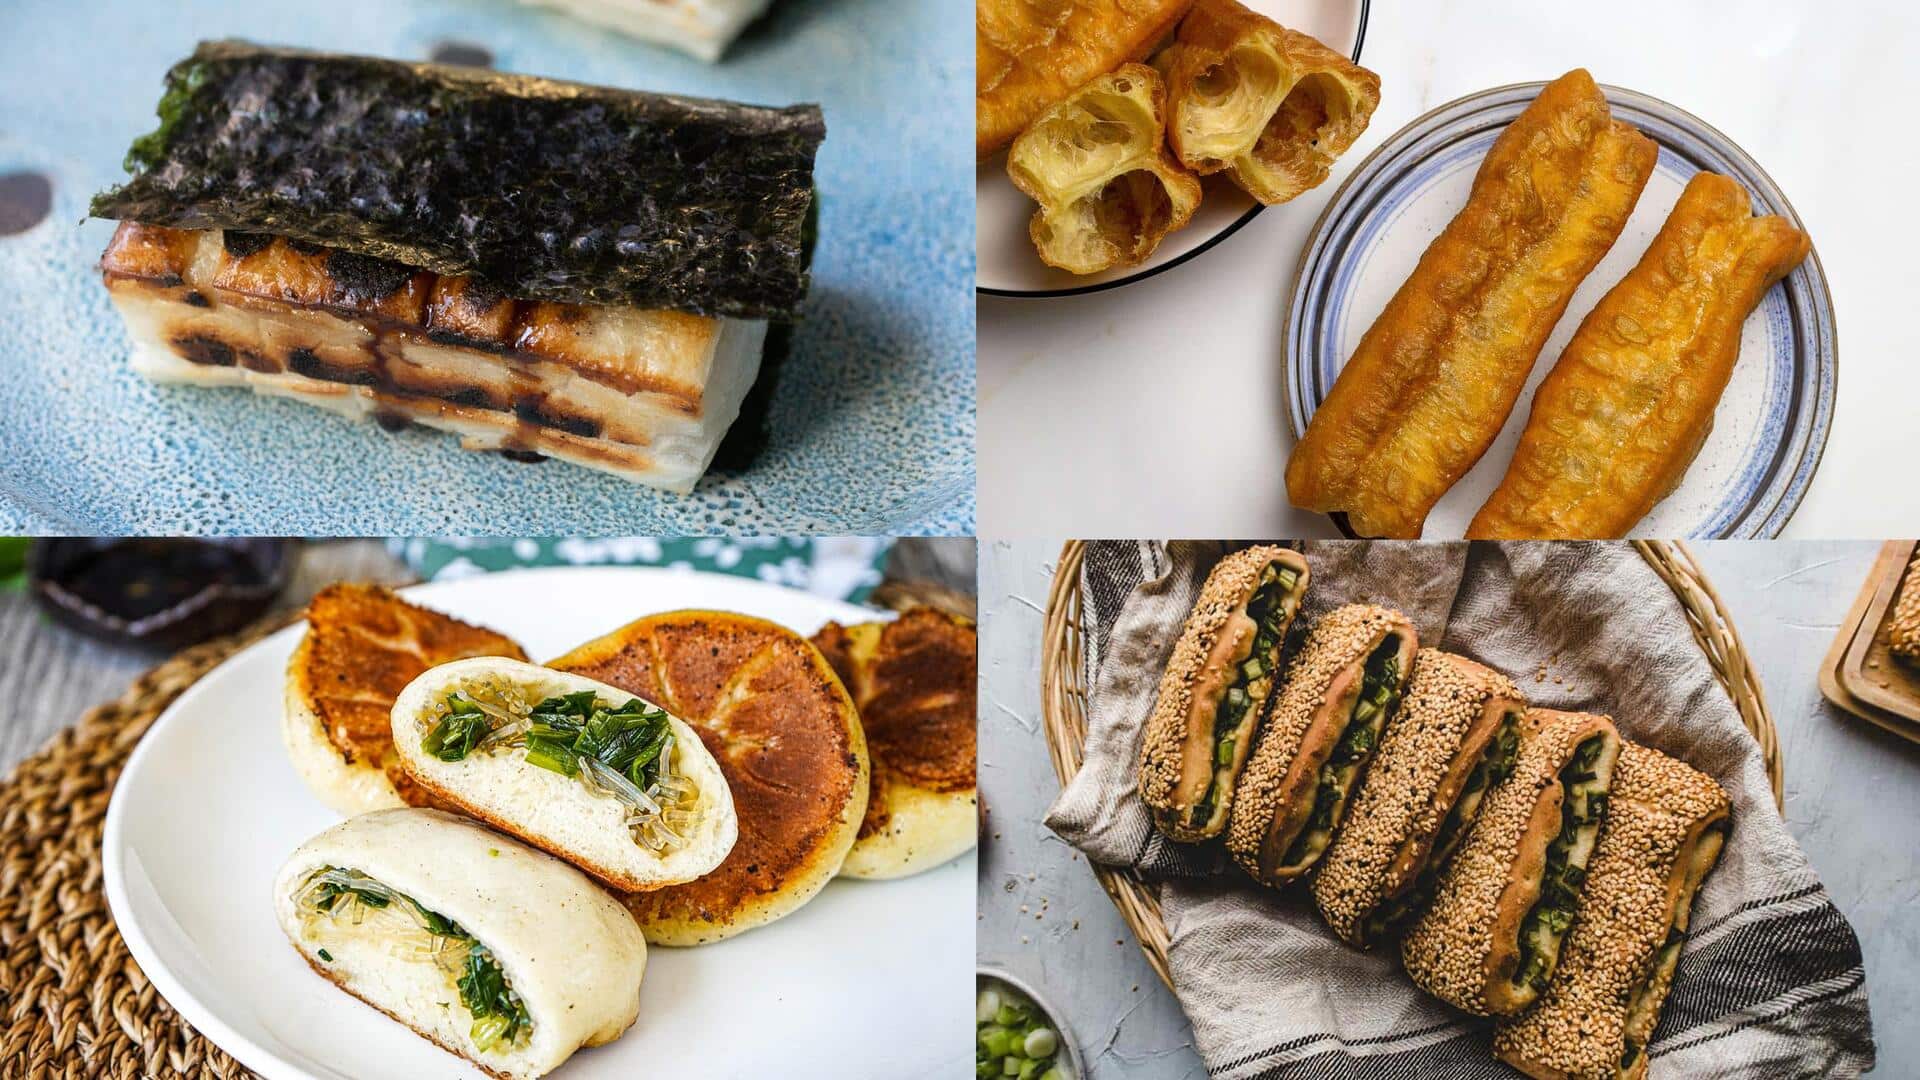 Eat these vegetarian foods when in Taiwan